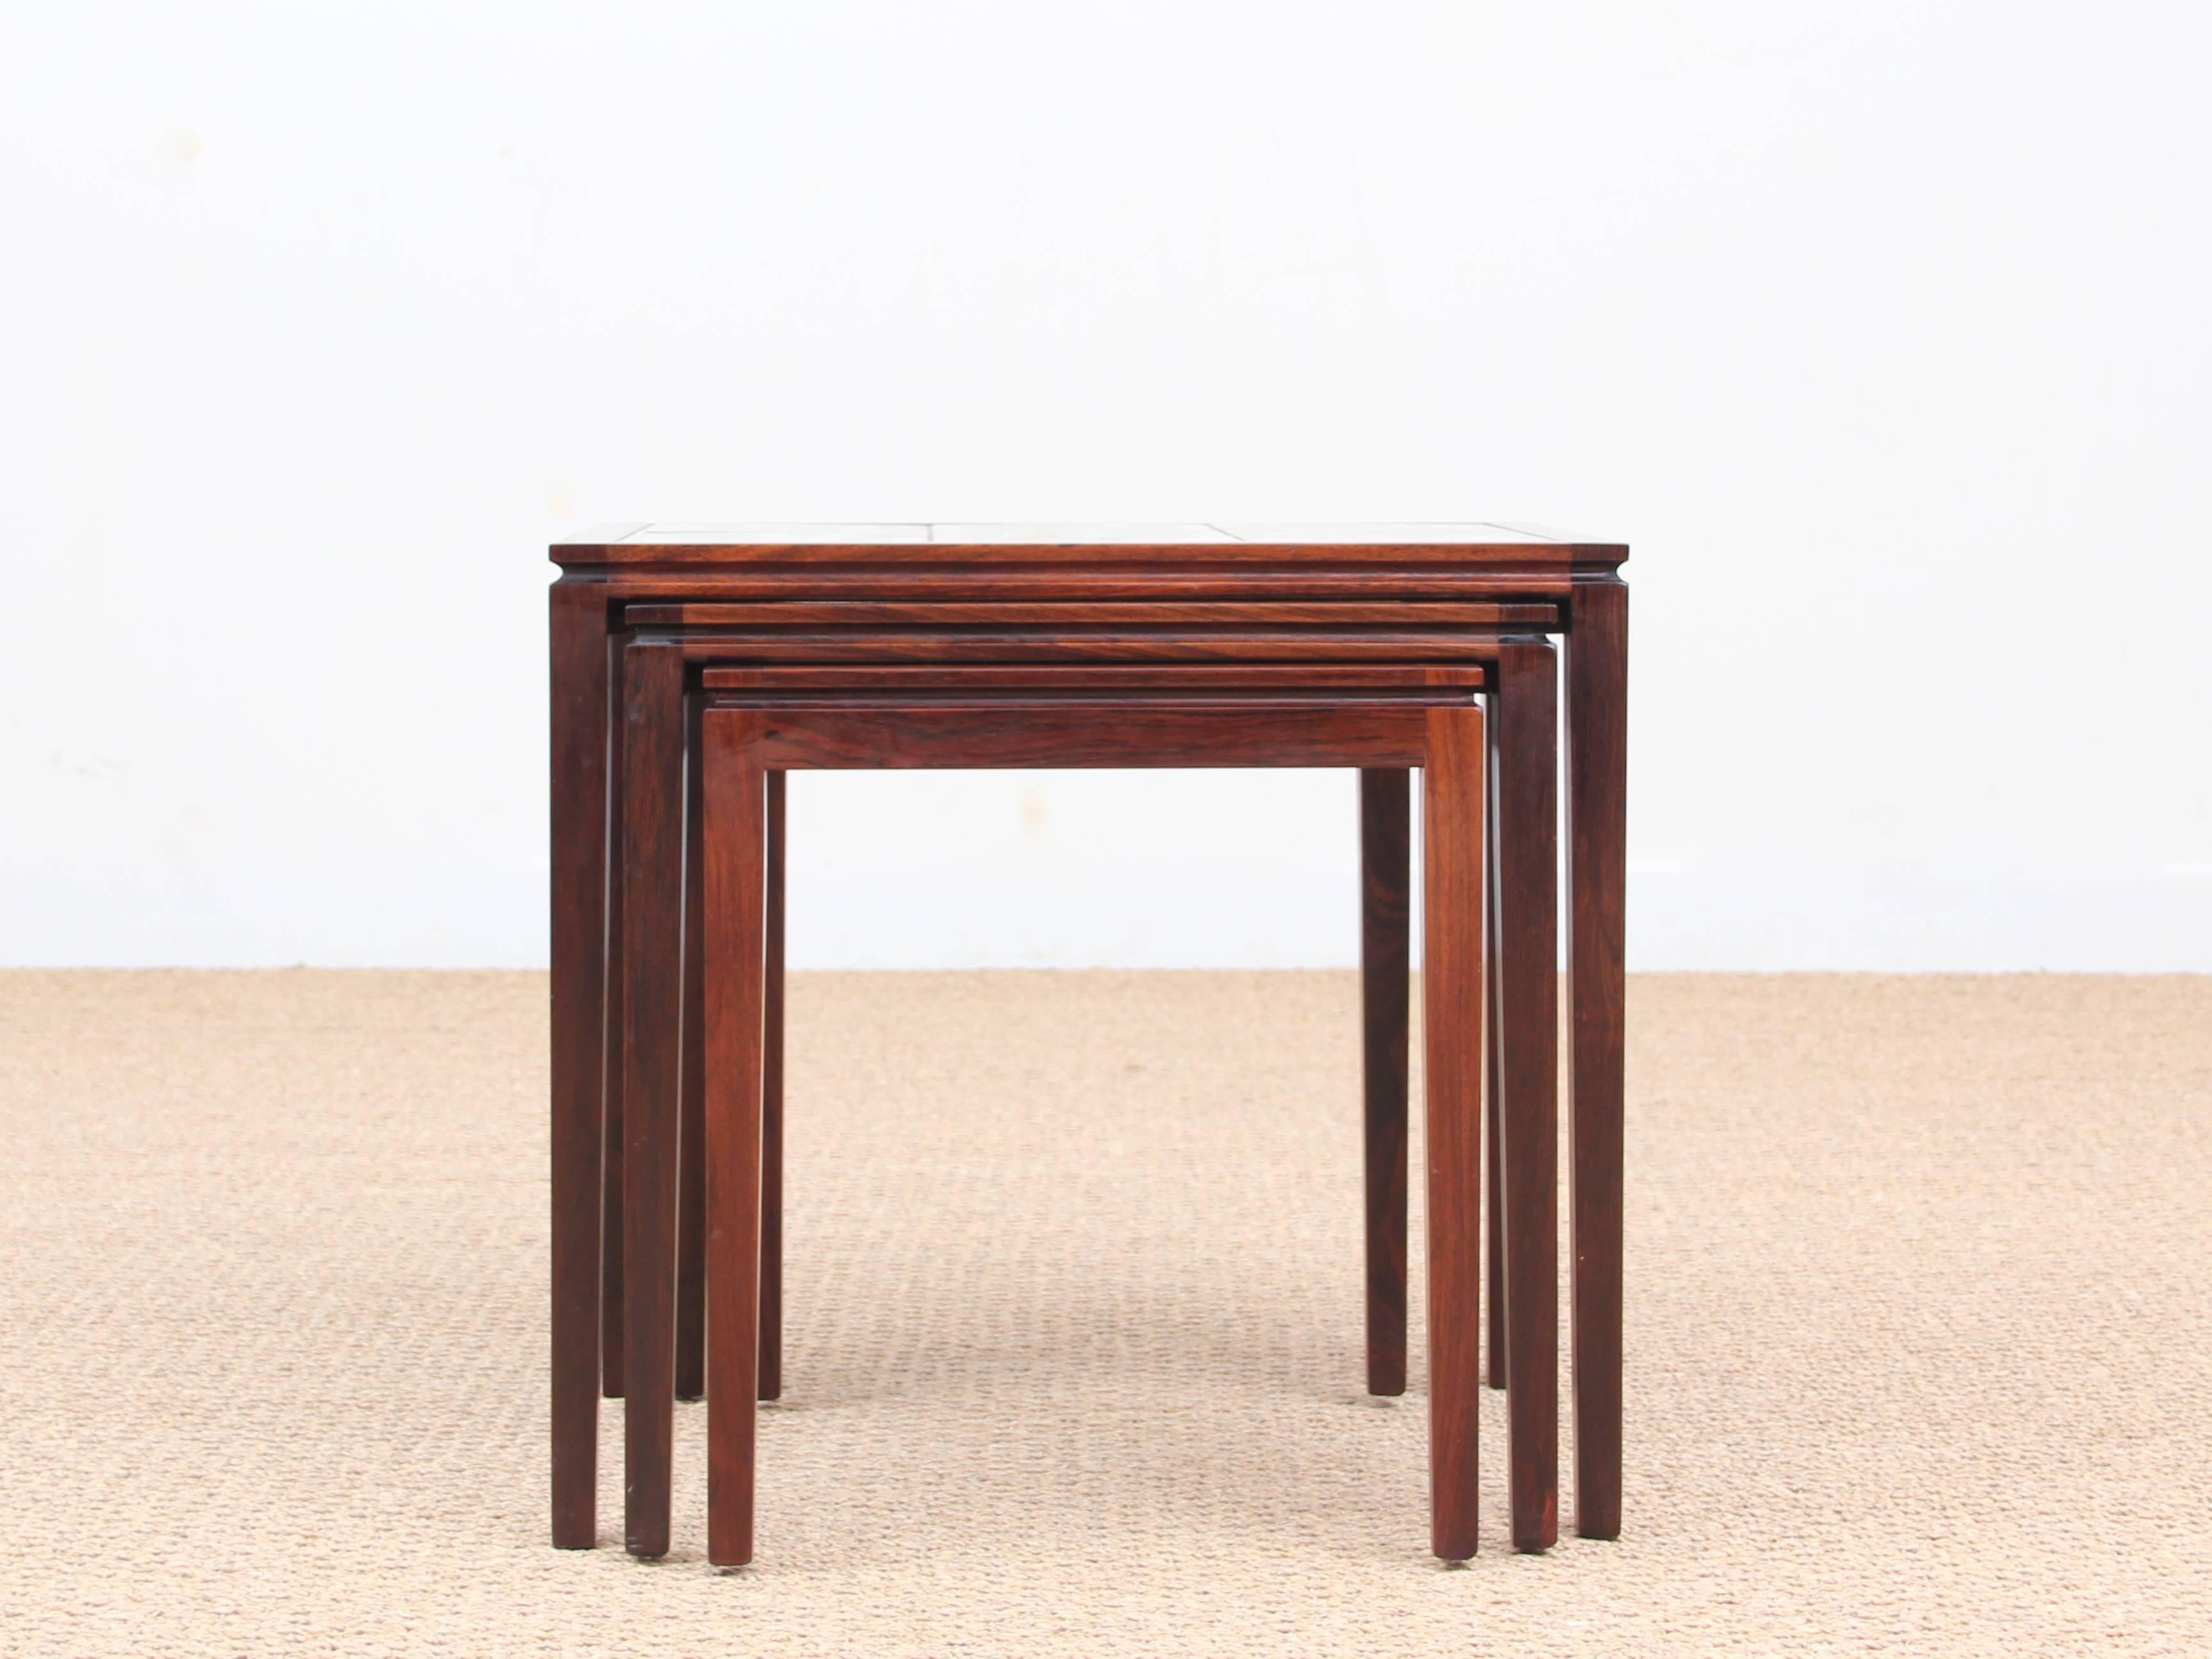 Mid-20th Century Mid-Century Modern Scandinavian Nesting Tables in Rio Rosewood and Ceramic Tale